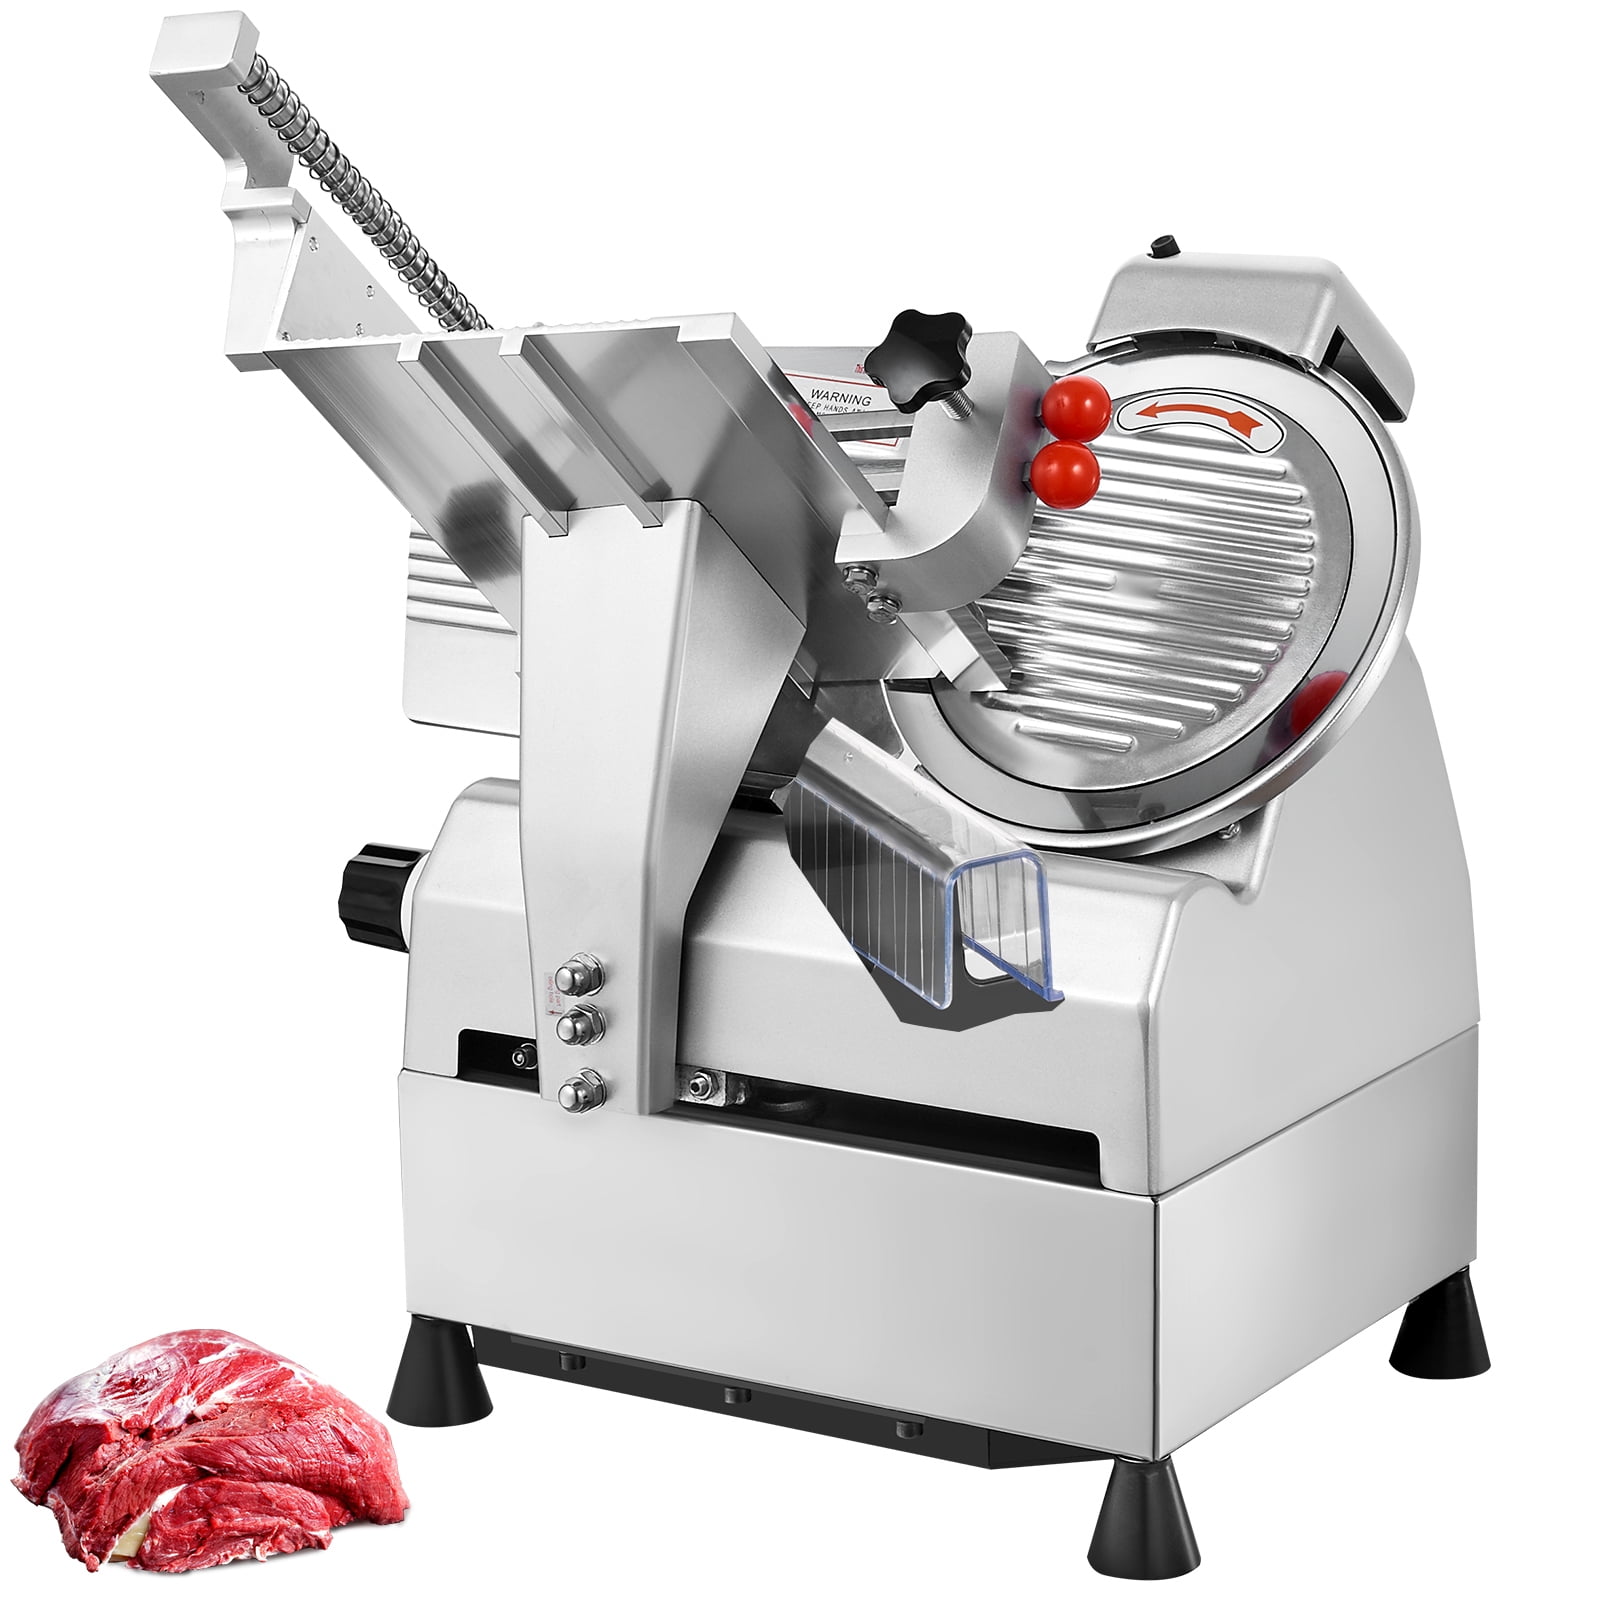 Yescom 10 inch Meat Slicer 240W 530RPM Commercial Electric Slicer Cheese Food Deli Stainless Steel Cutter